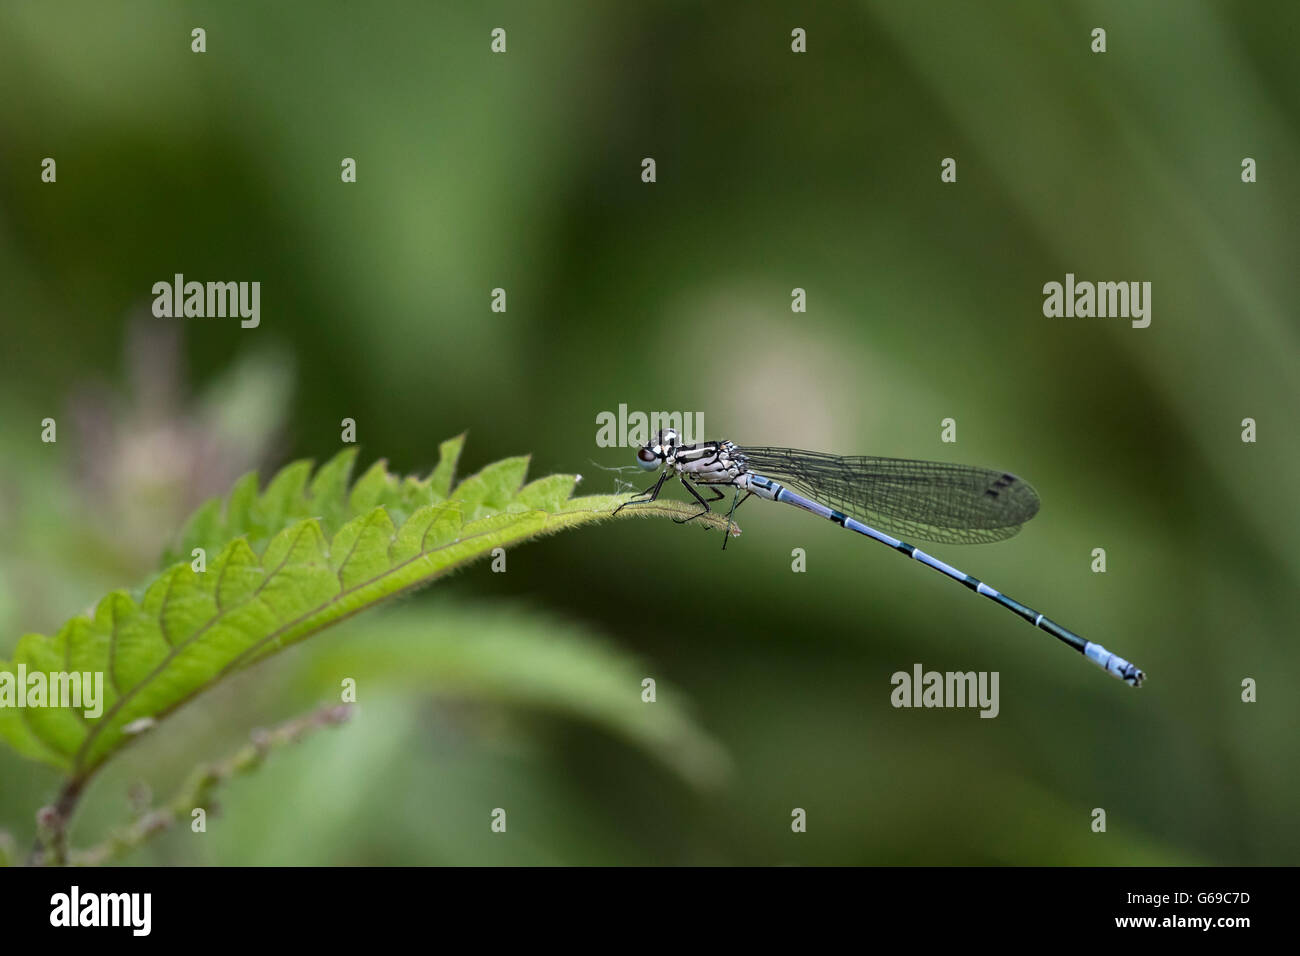 An azure damselfly (Coenagrion puella) perched on nettle vegetation Stock Photo